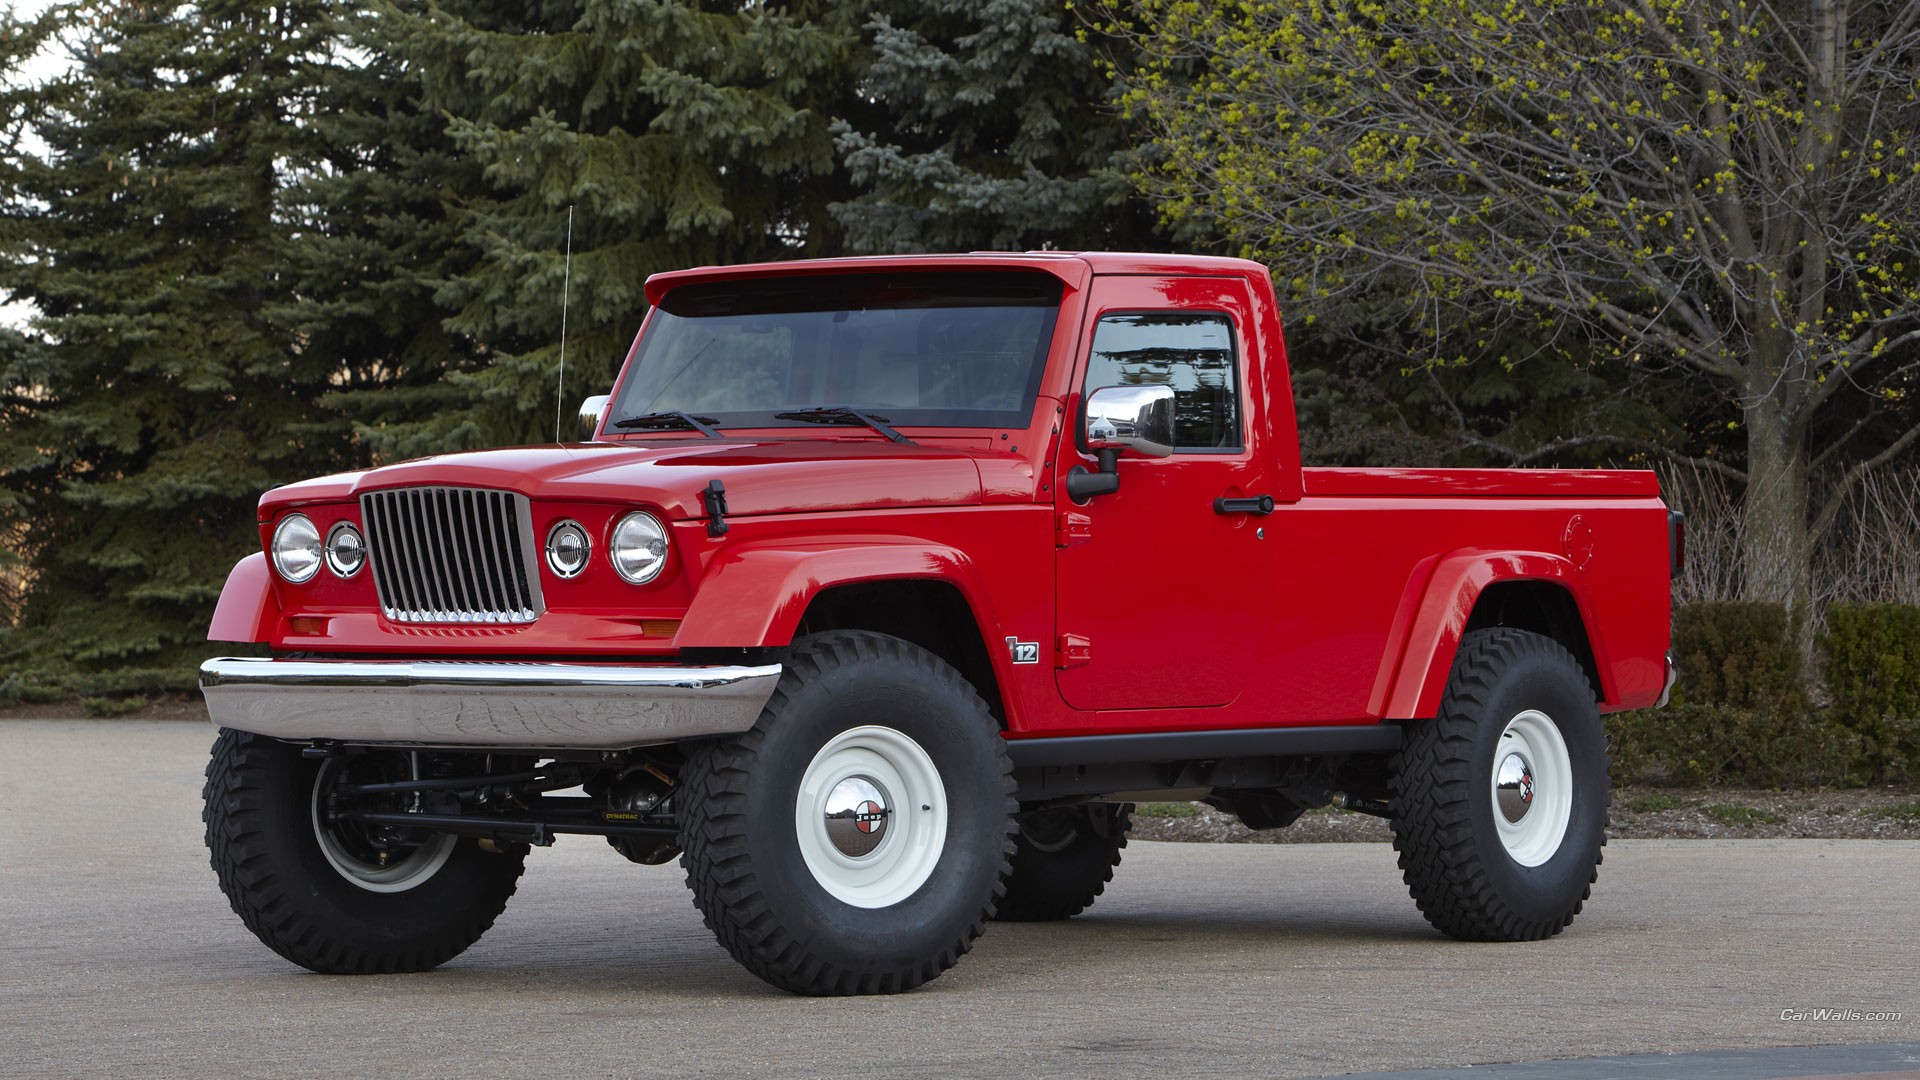 Jeep J 12, Concept Cars, Red Cars Wallpaper